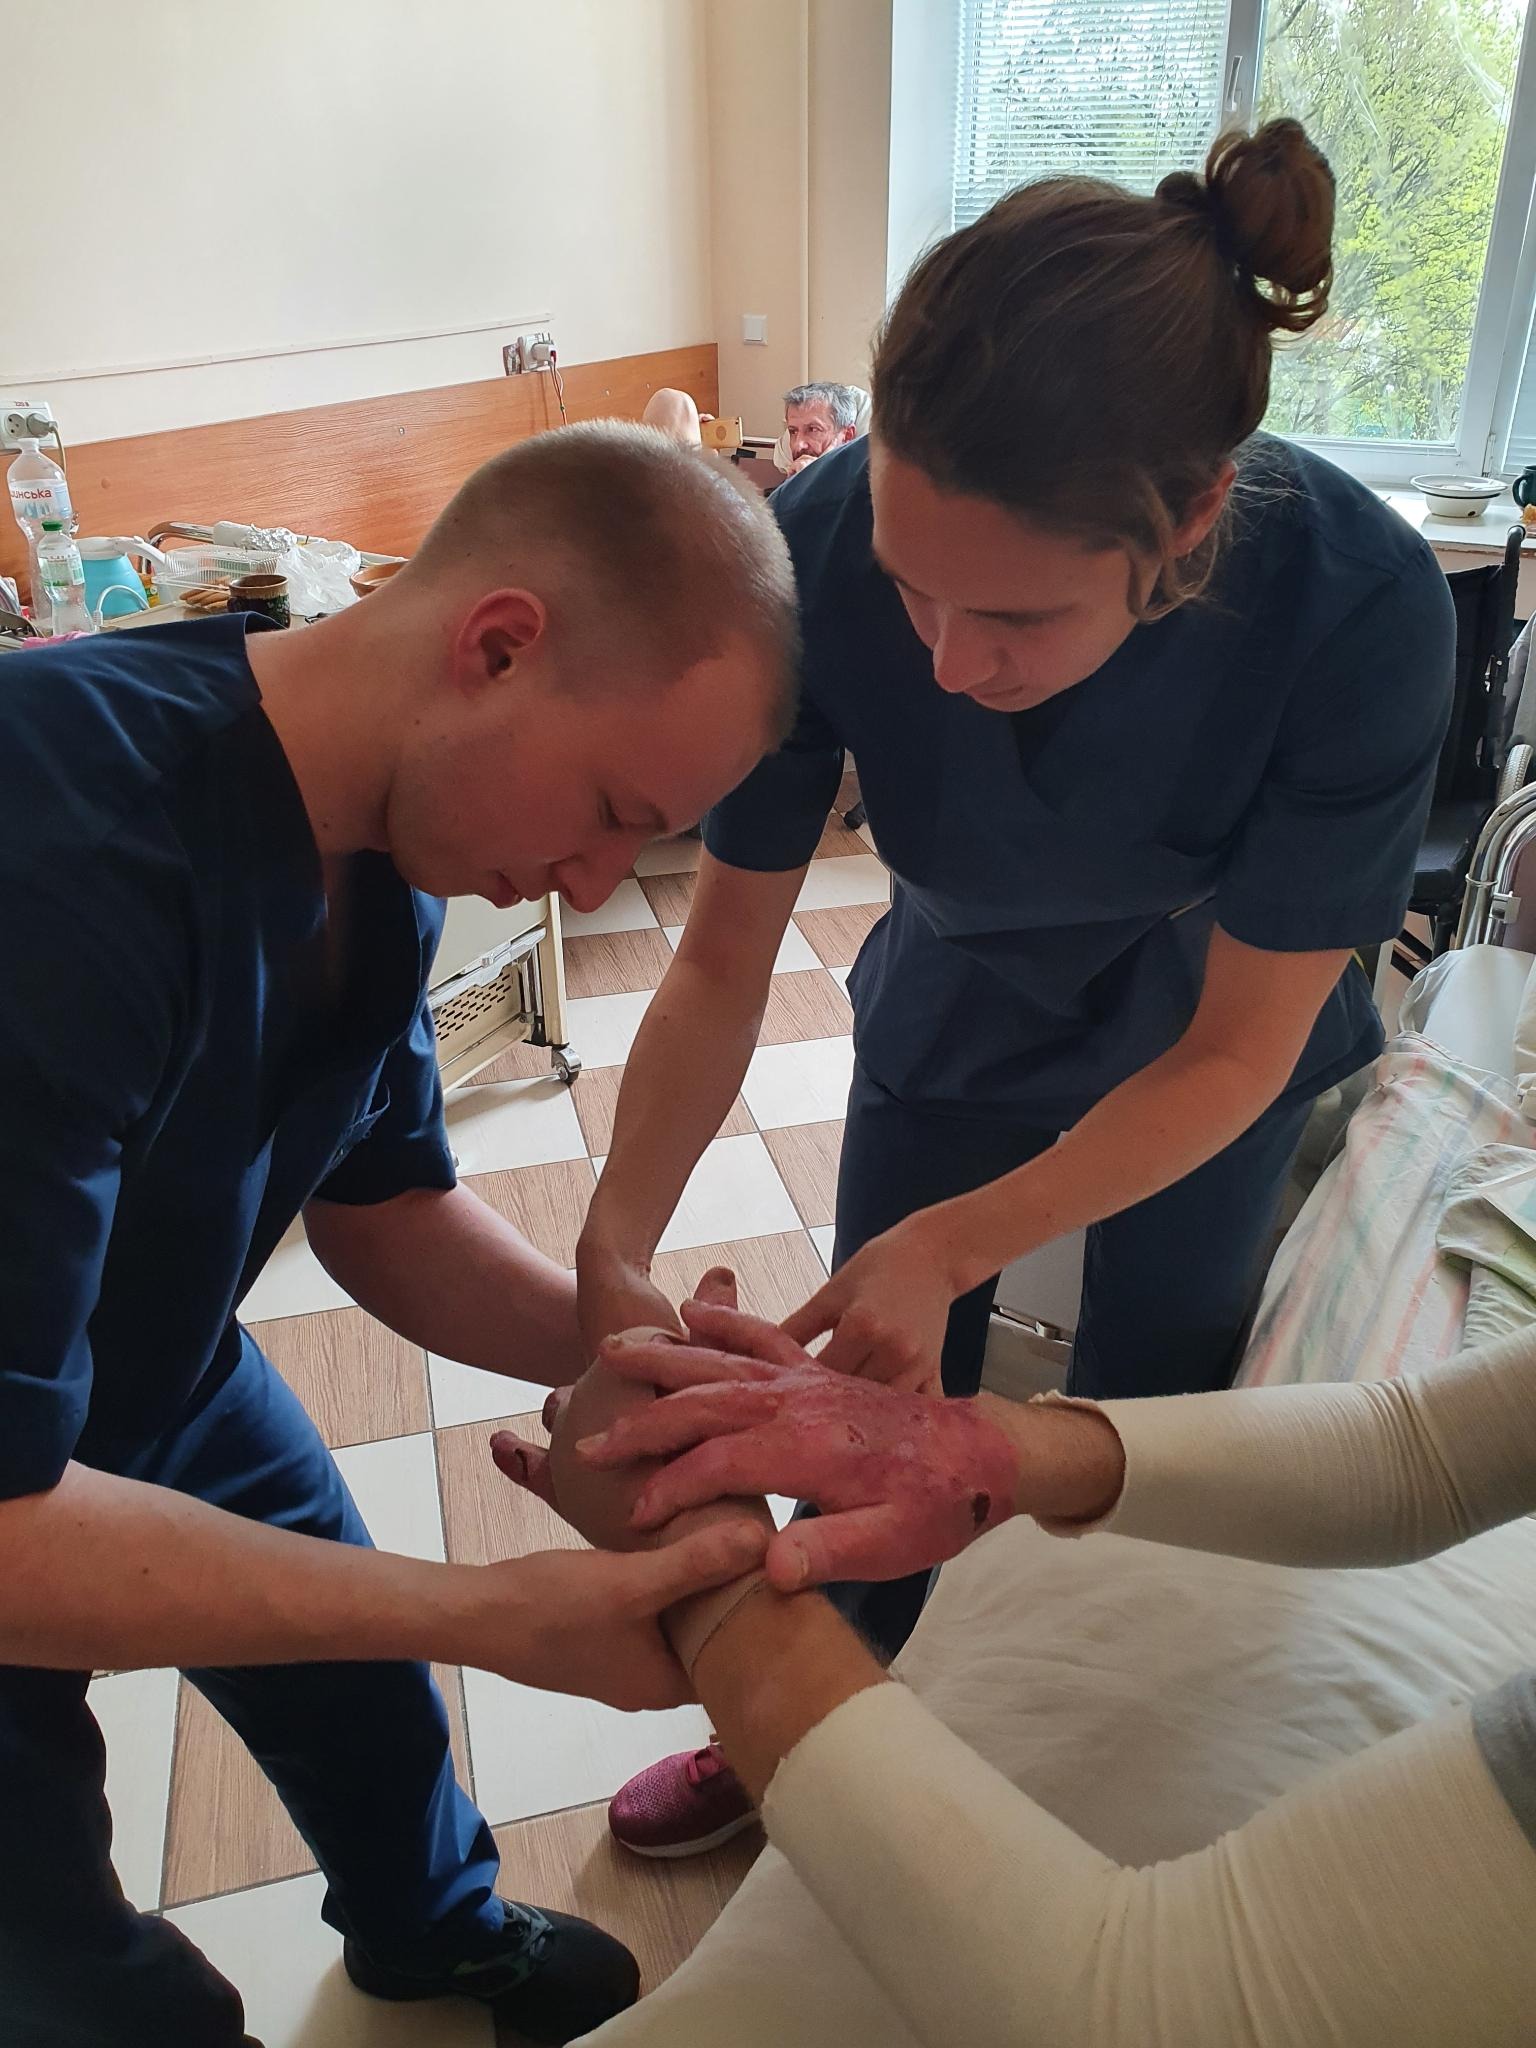 Violette provides practical on-the-job training to Ivan, a physical therapy student in Ukraine